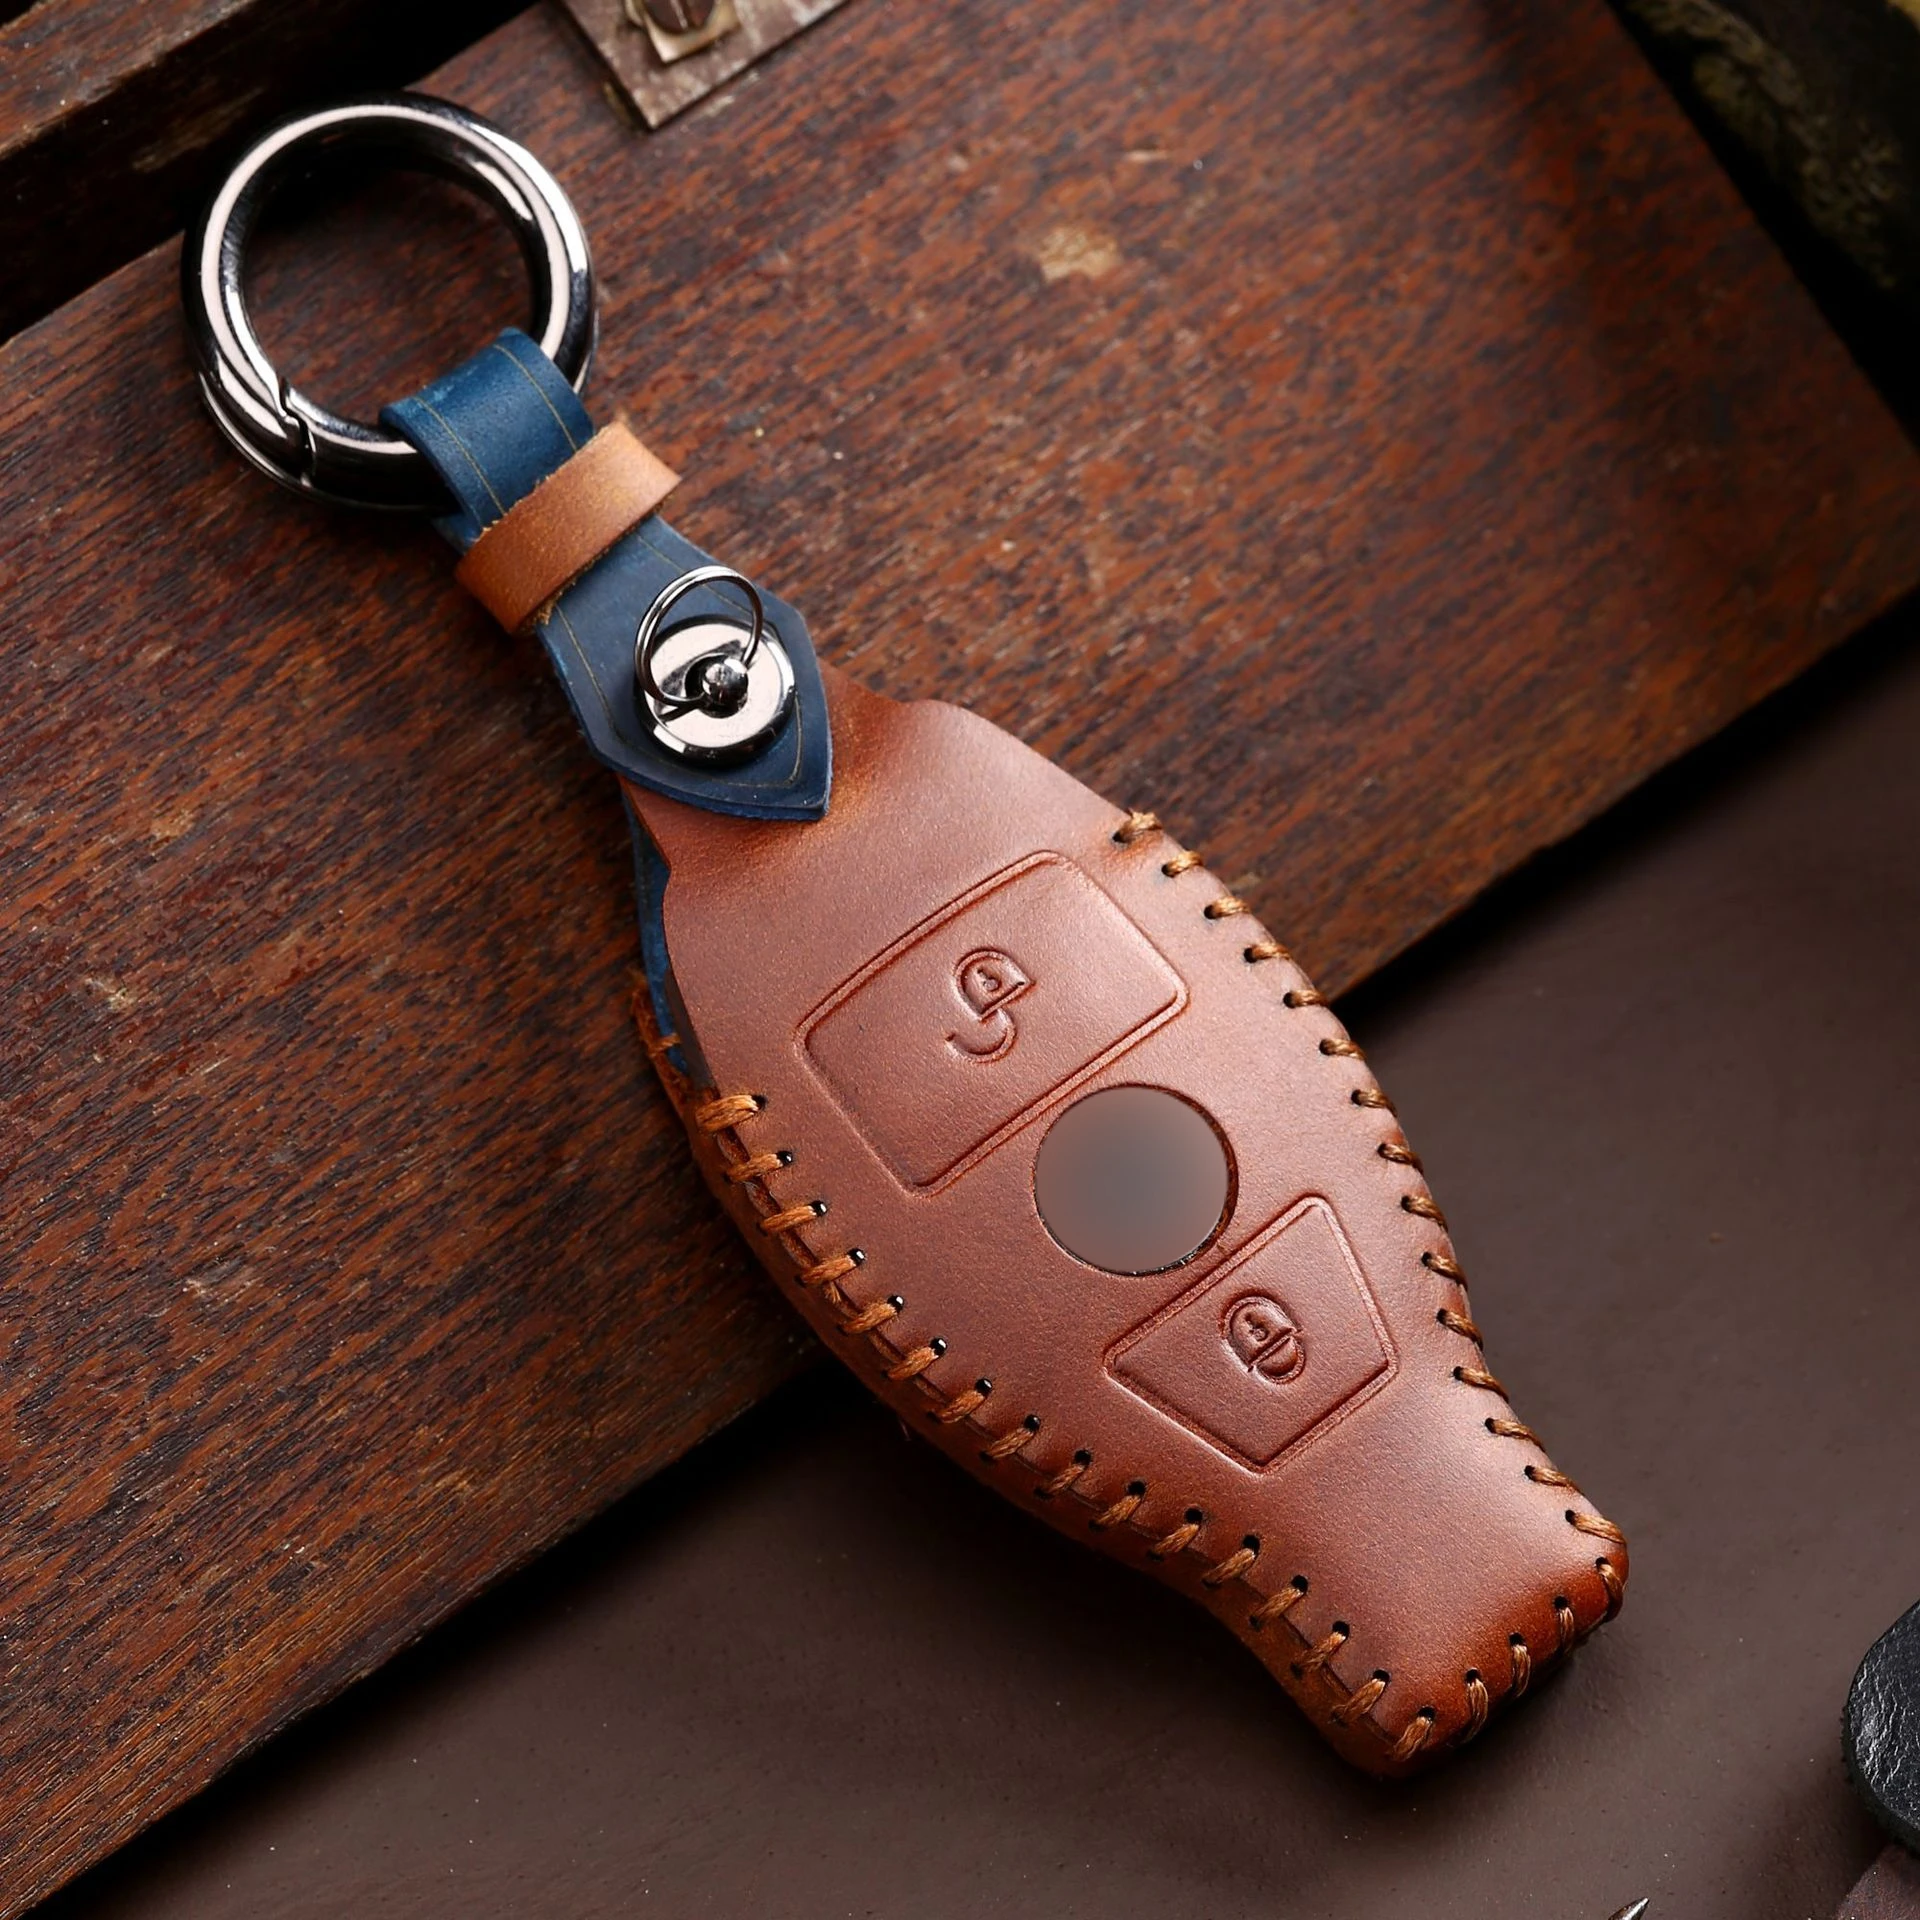 

1 PCS Genuine Leather Key Case Key Cover For Mercedes Benz W124 W212 W210 W176 Gla Amg Cla Amg W203 W204 W211 Car Accessories